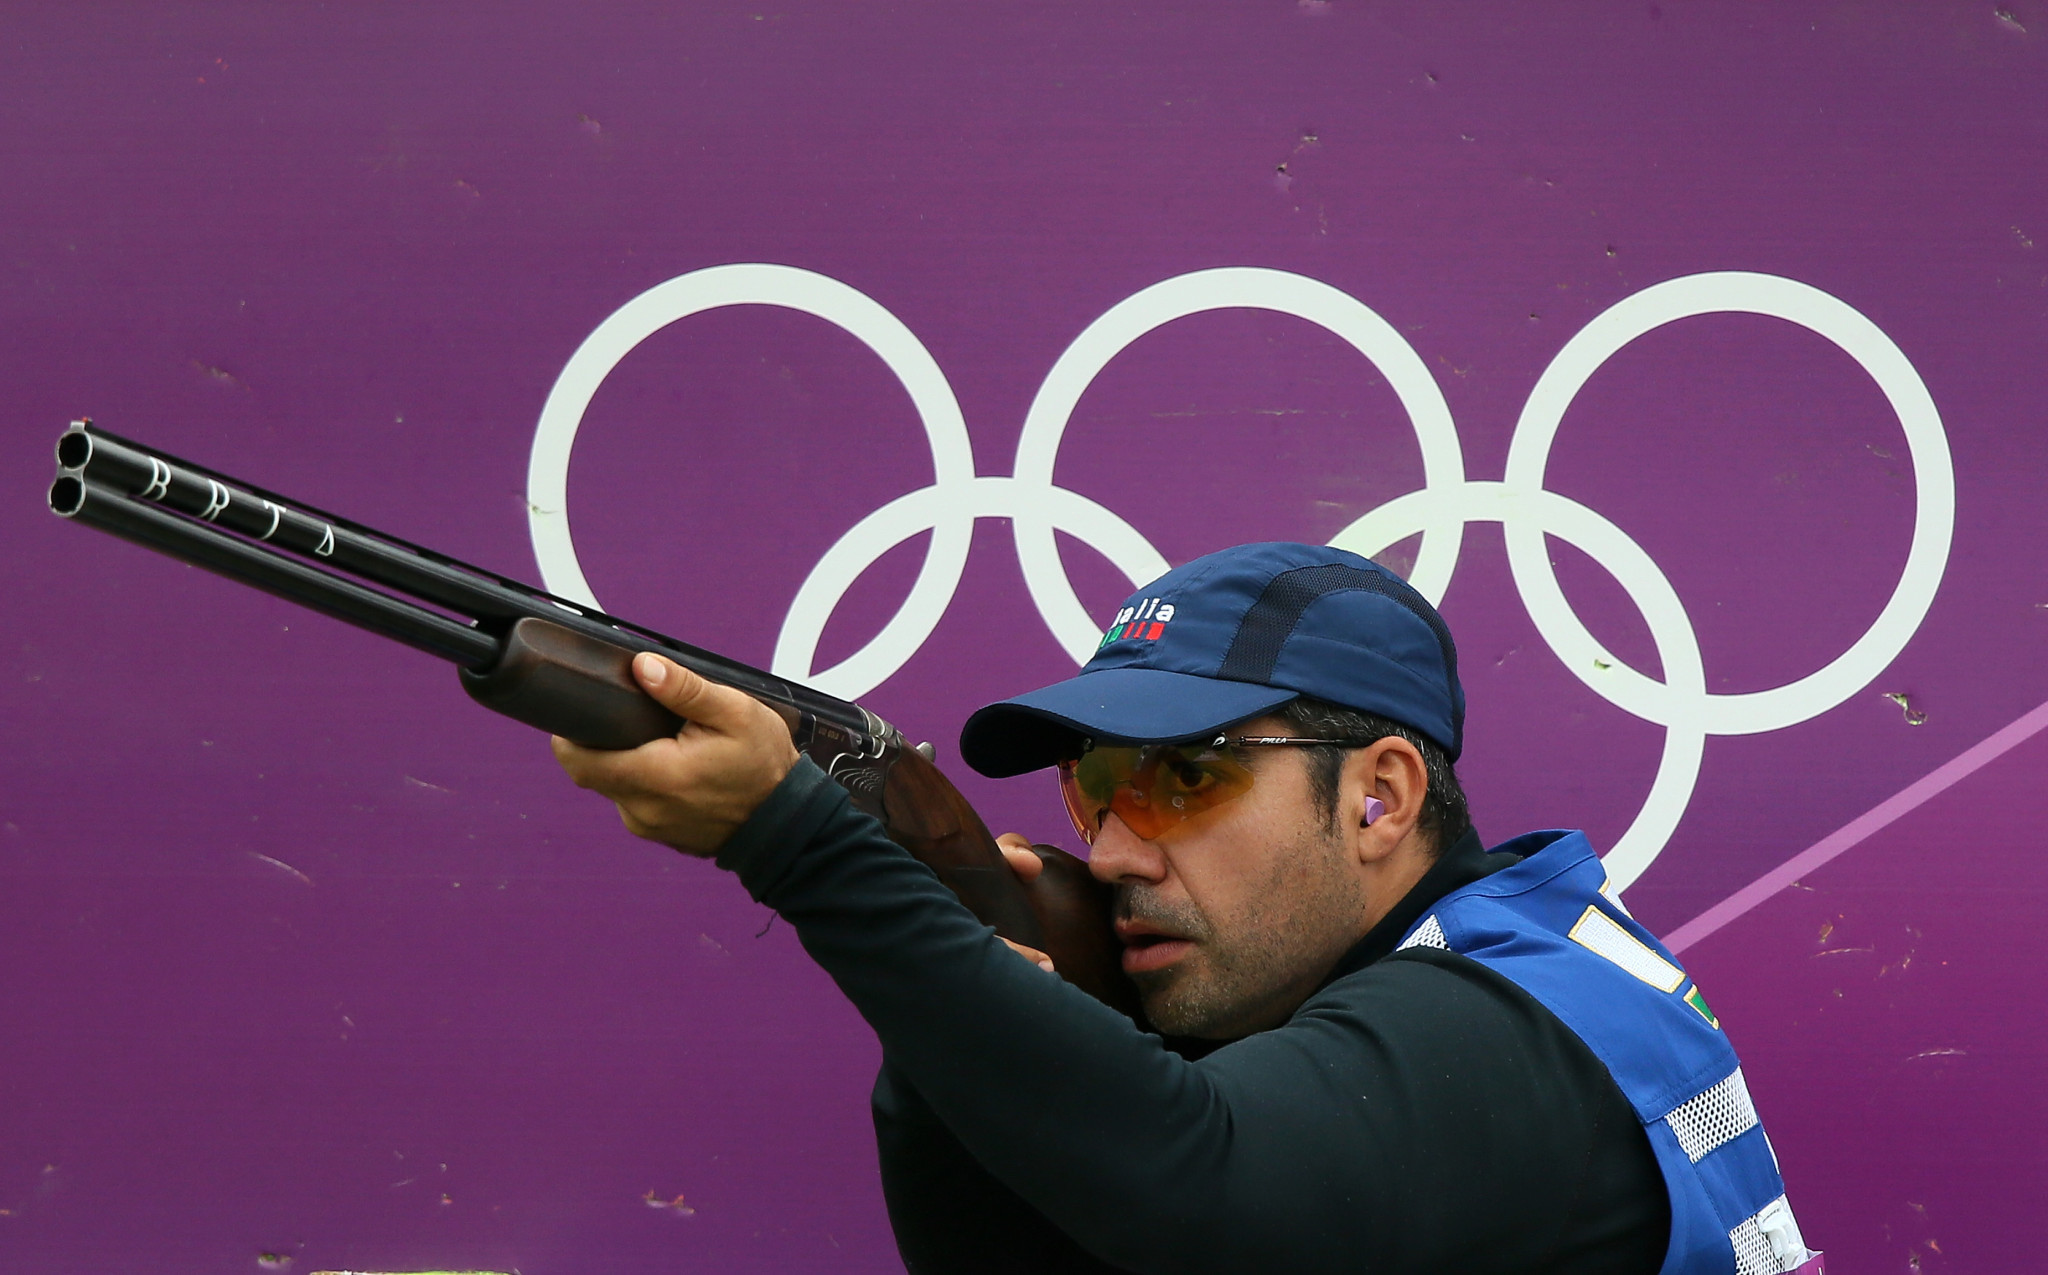 Italy's Lodde claims men's skeet title at ISSF Shotgun World Cup